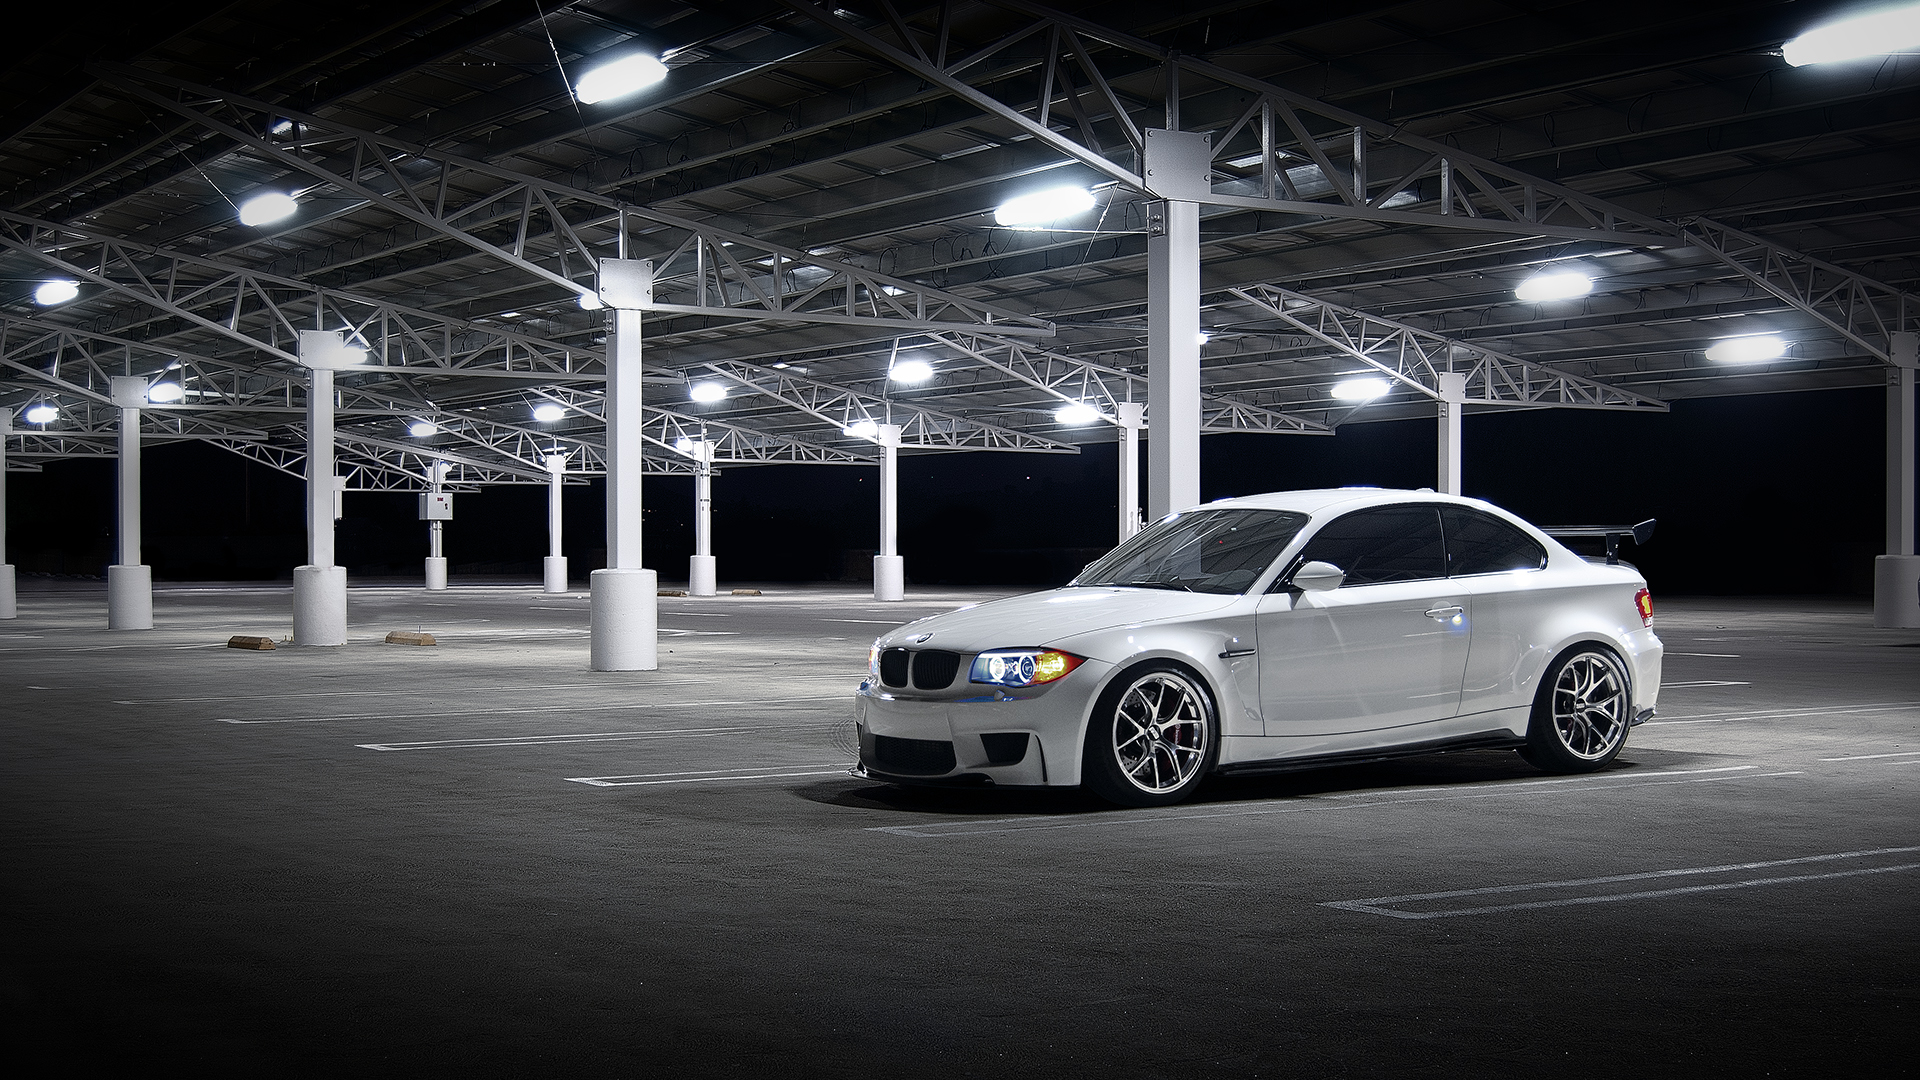 Your Ridiculously Cool BMW 1M Wallpaper Is Here